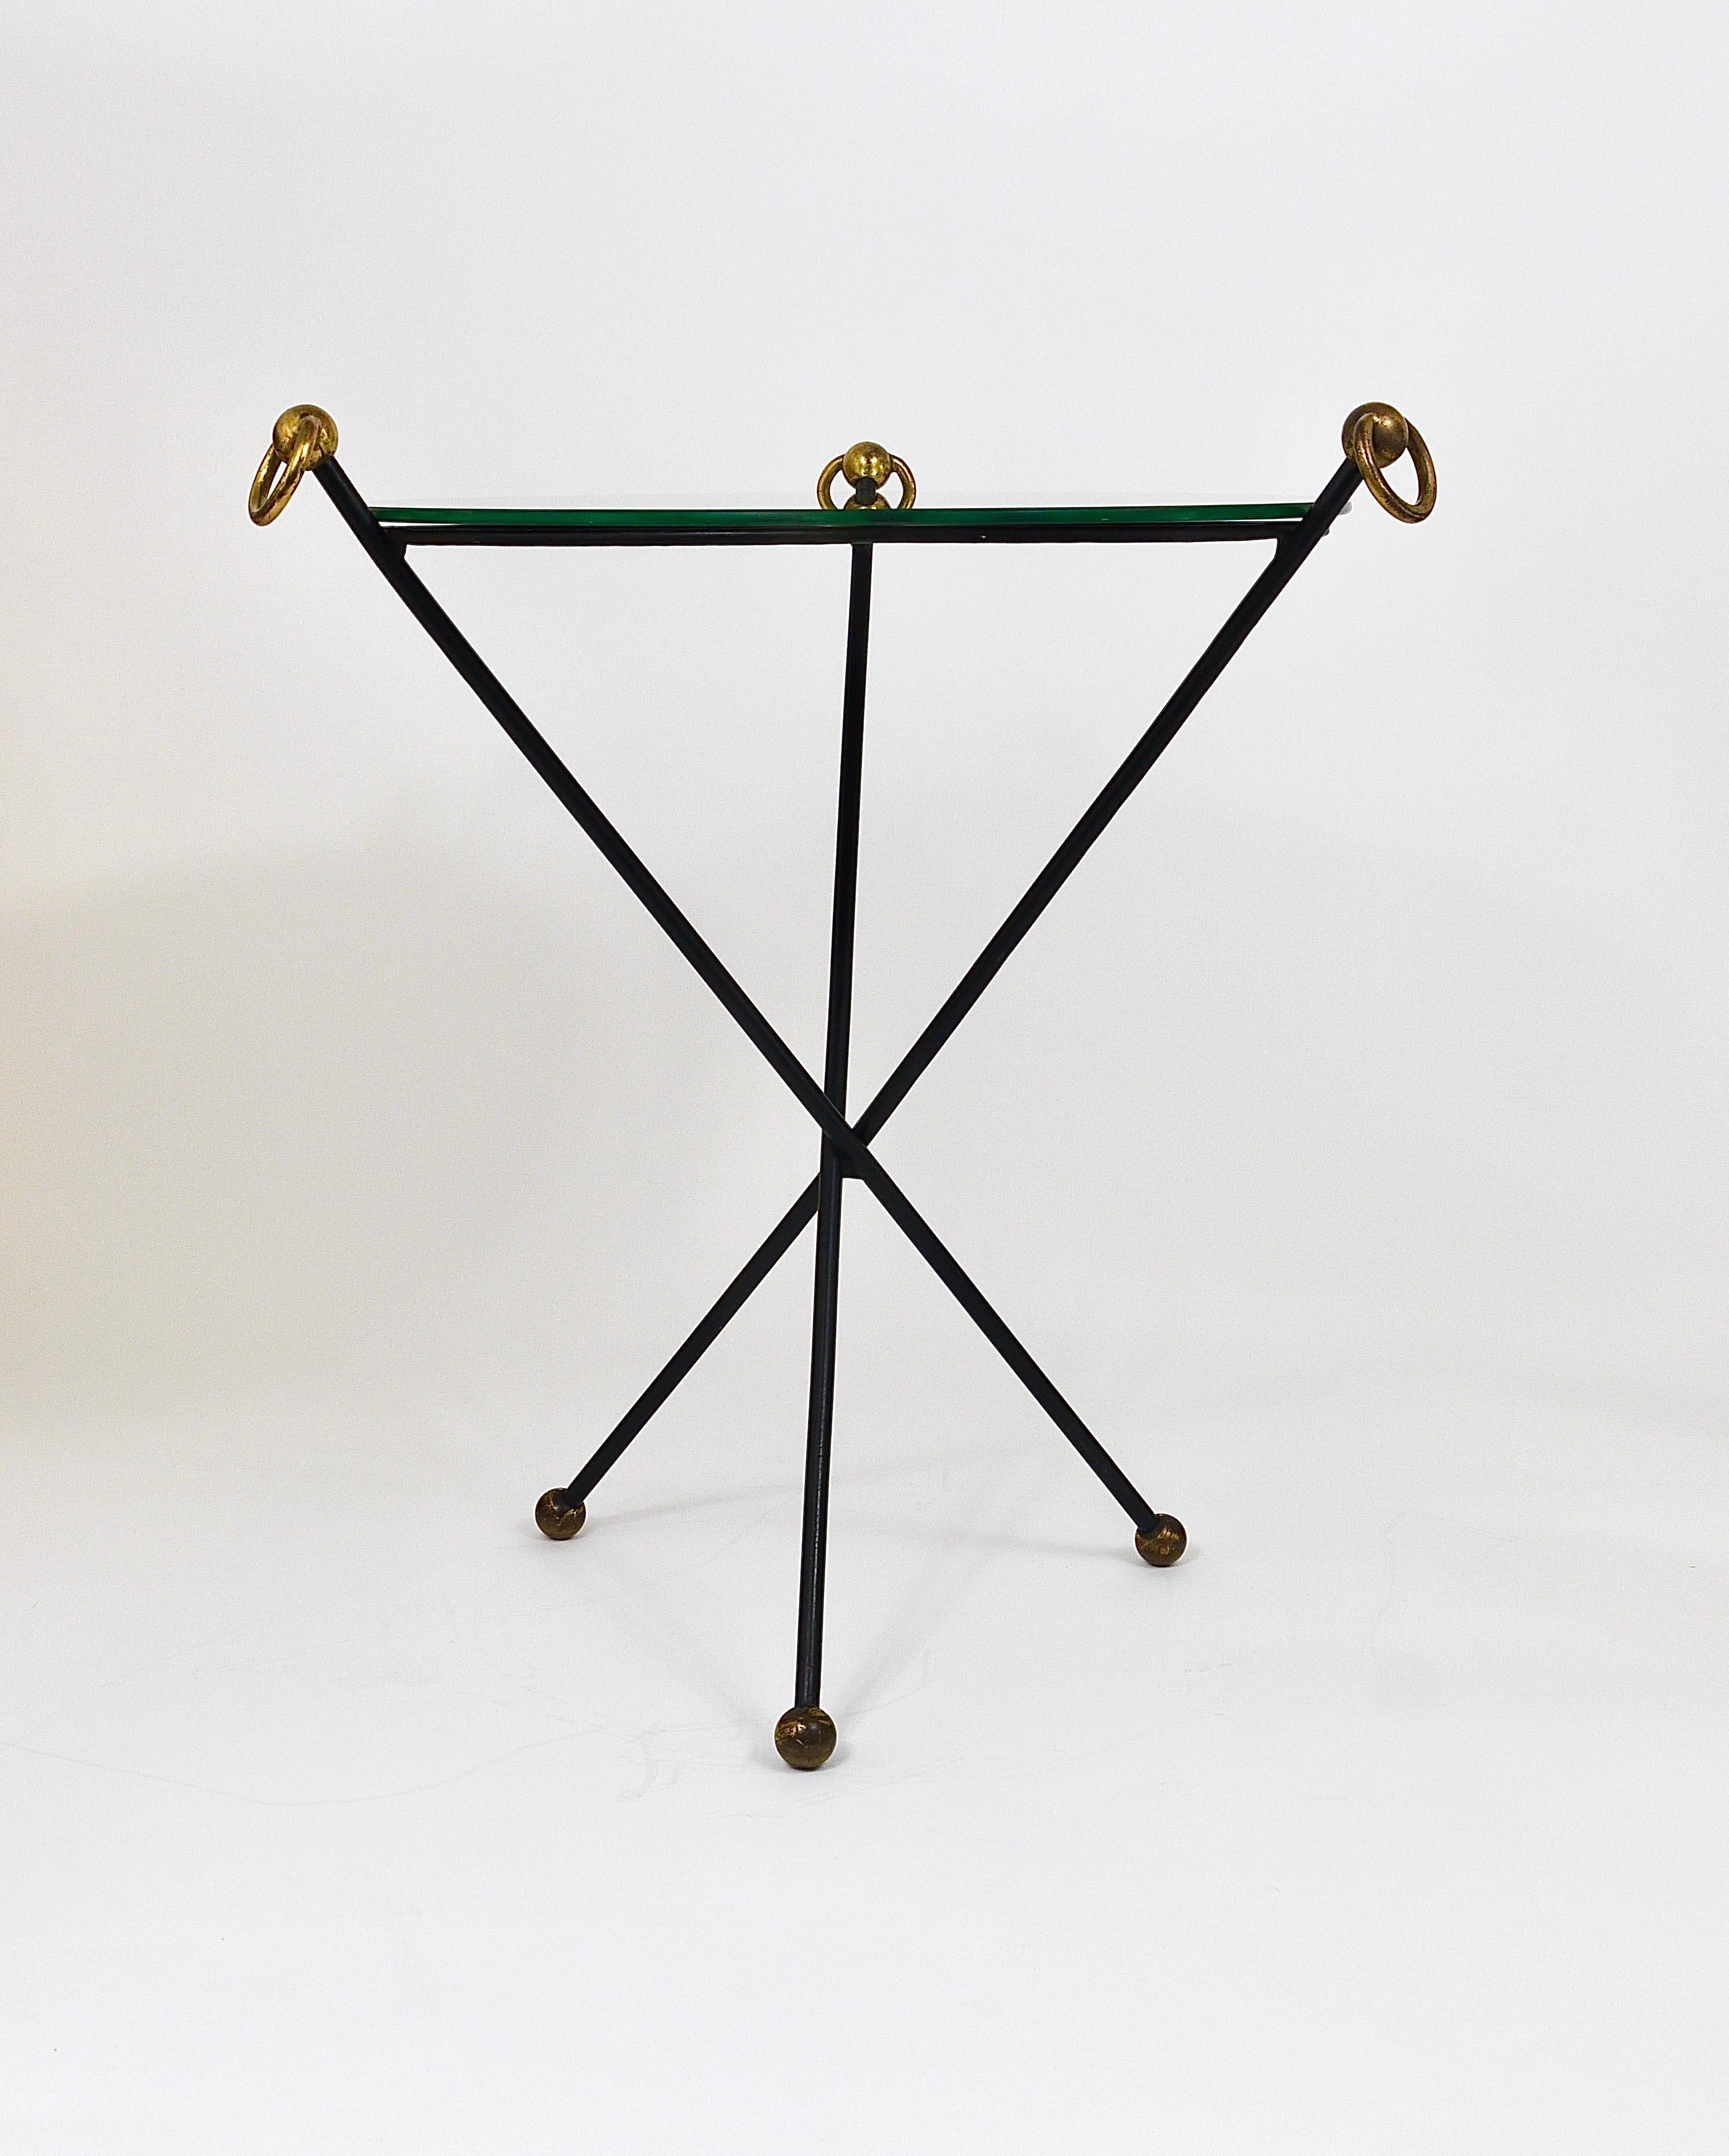 French Mid-Century Modern Mirror Side Table, Jacques Adnet Style, Brass, 1950s For Sale 7